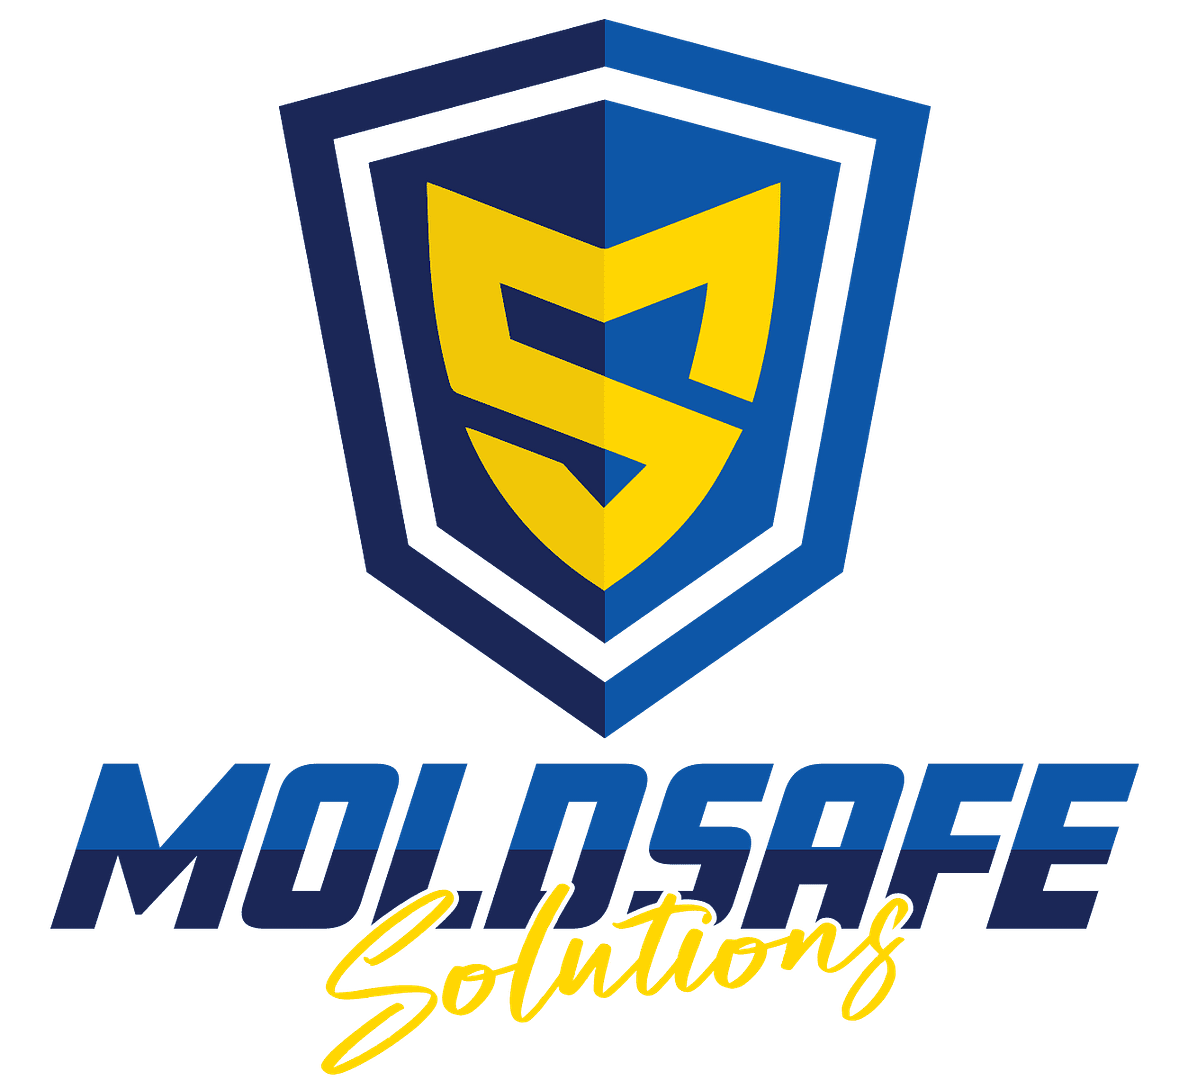 Mold Safe Solutions